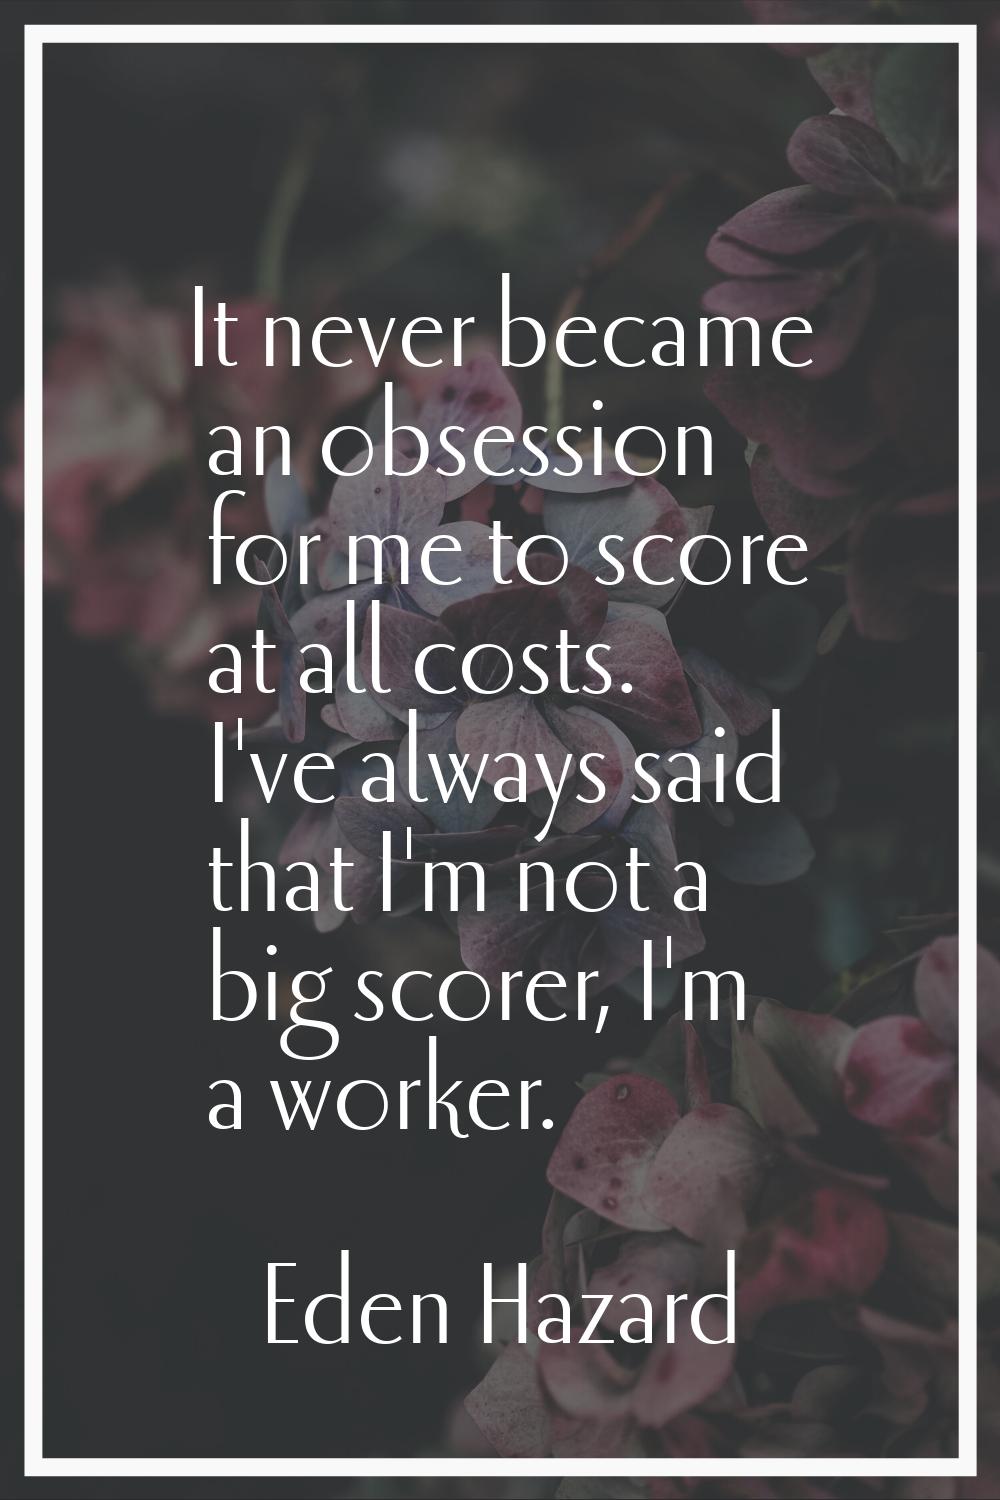 It never became an obsession for me to score at all costs. I've always said that I'm not a big scor